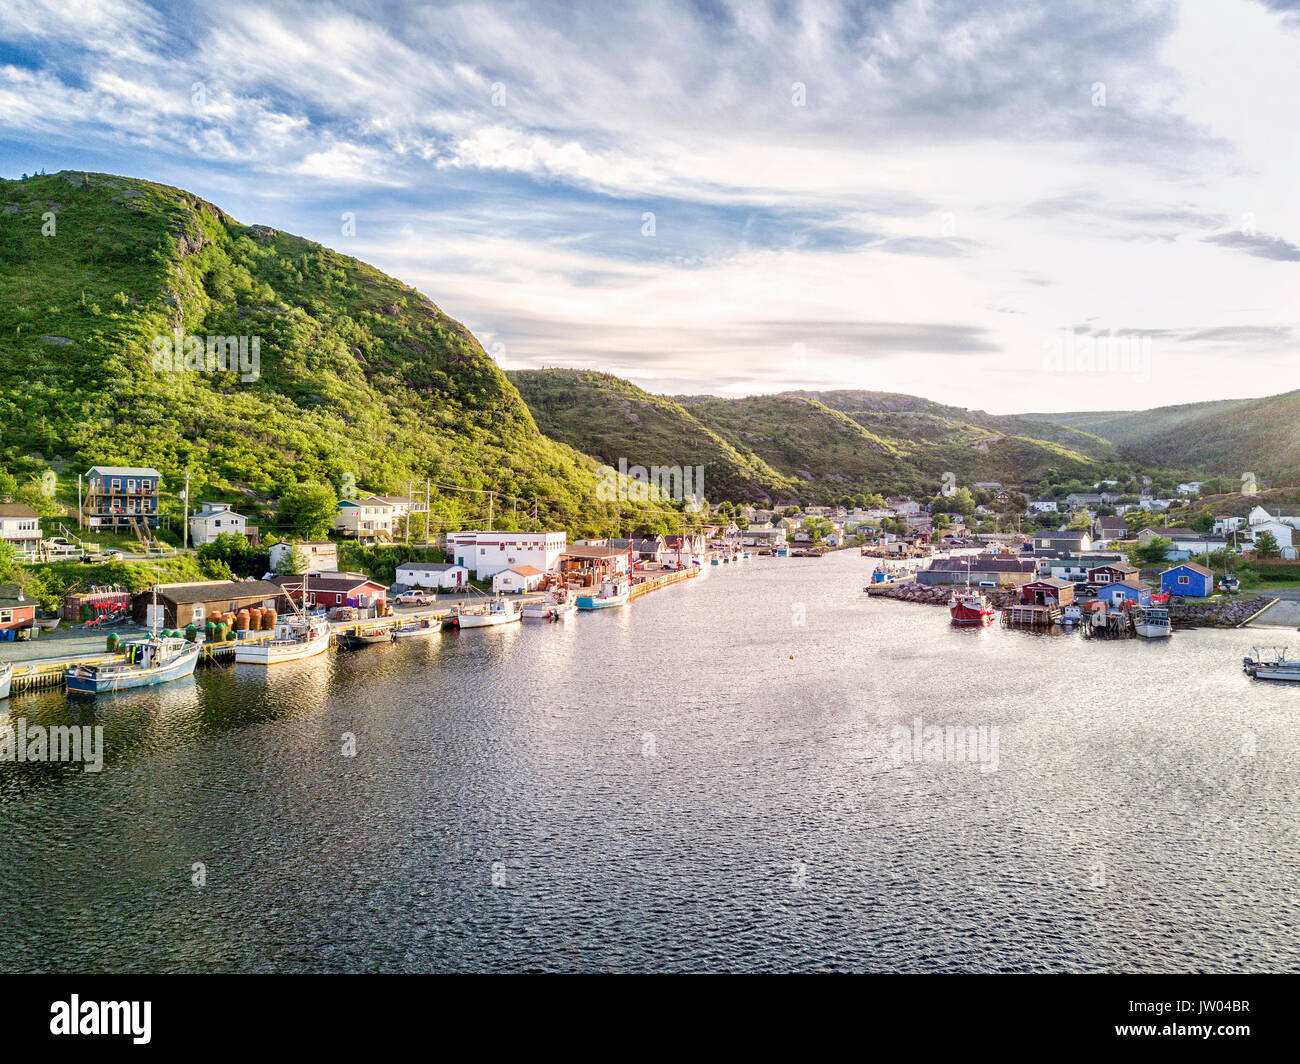 Charming Petty Harbour with green hills and colorful wooden architecture, Newfoundland, Canada Stock Photo